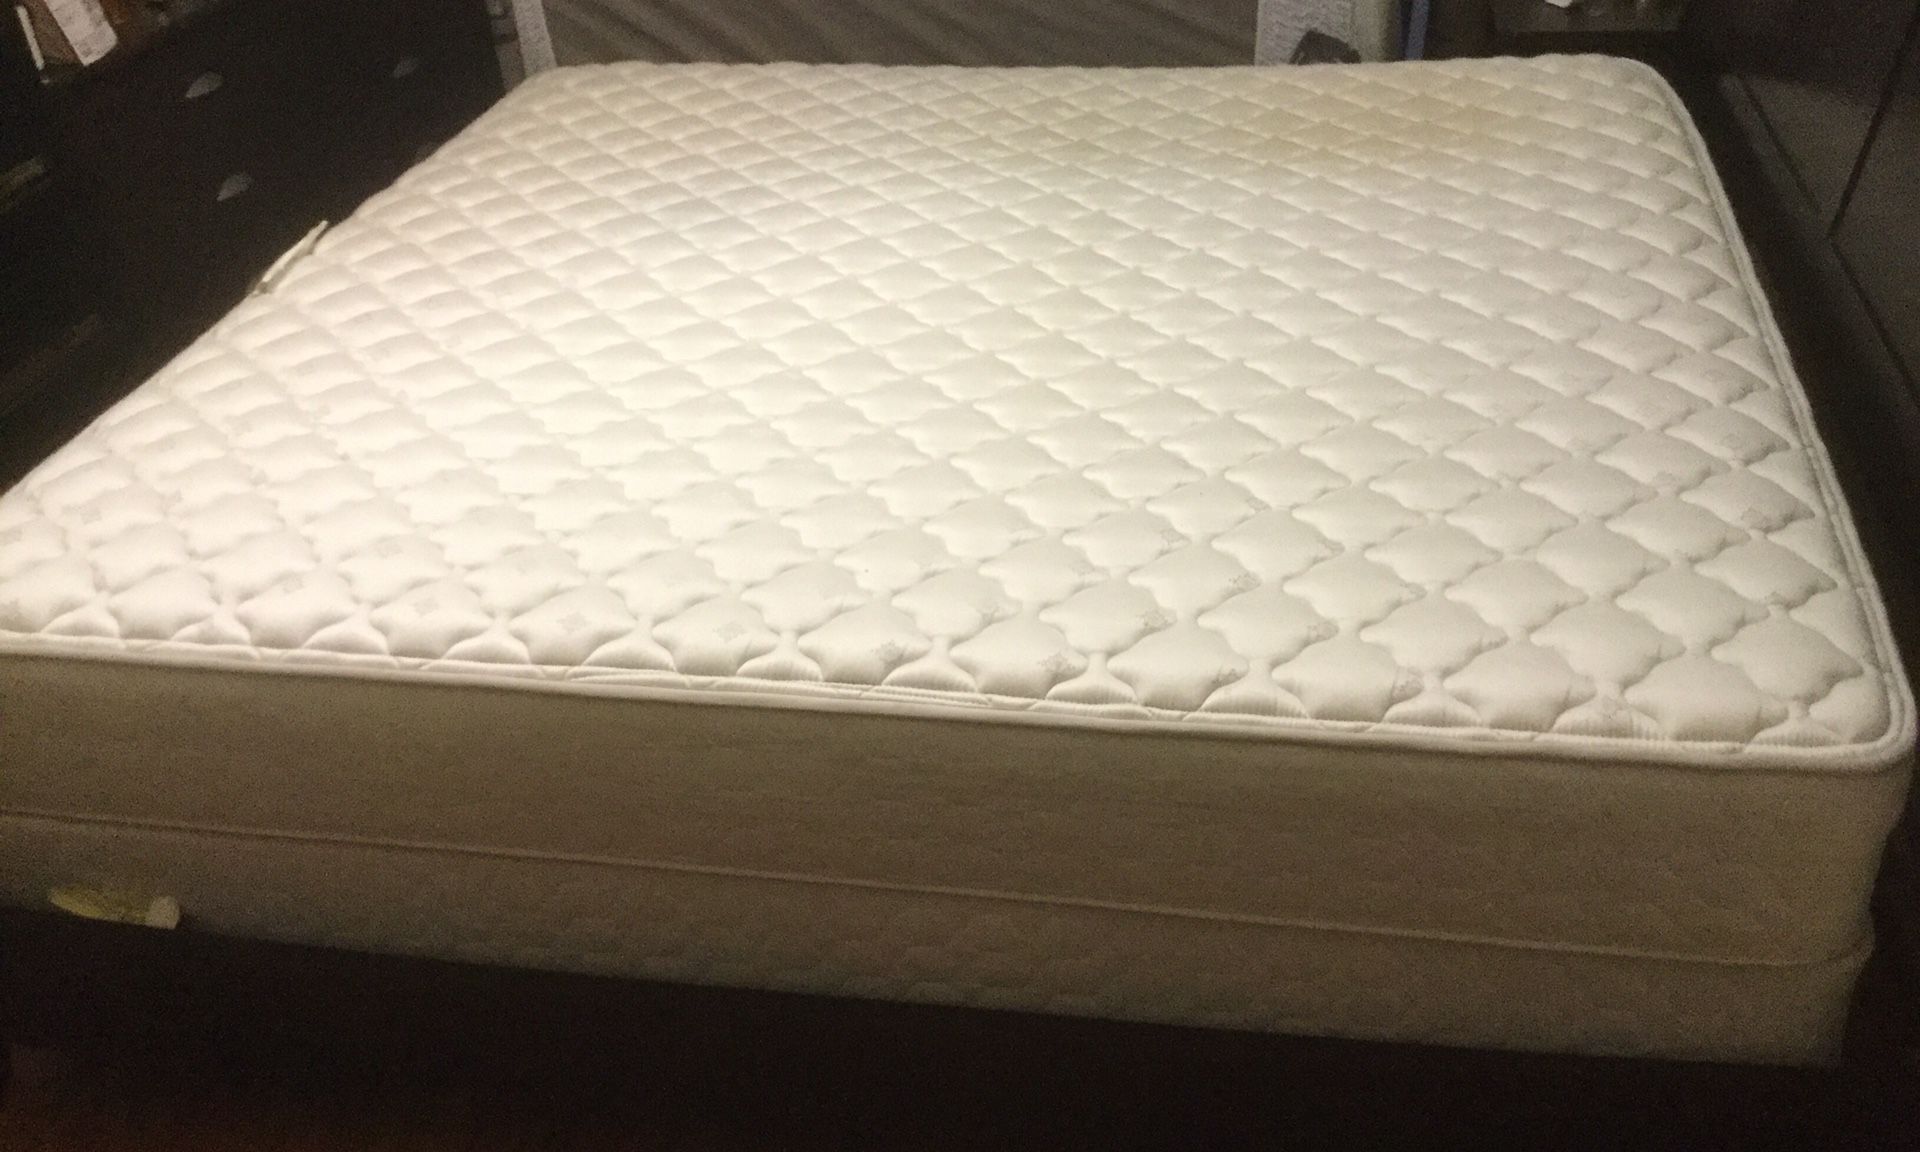 ‘Sealy’ POSTUREPEDIC MATTRESS - KING SIZE (Ivory color)